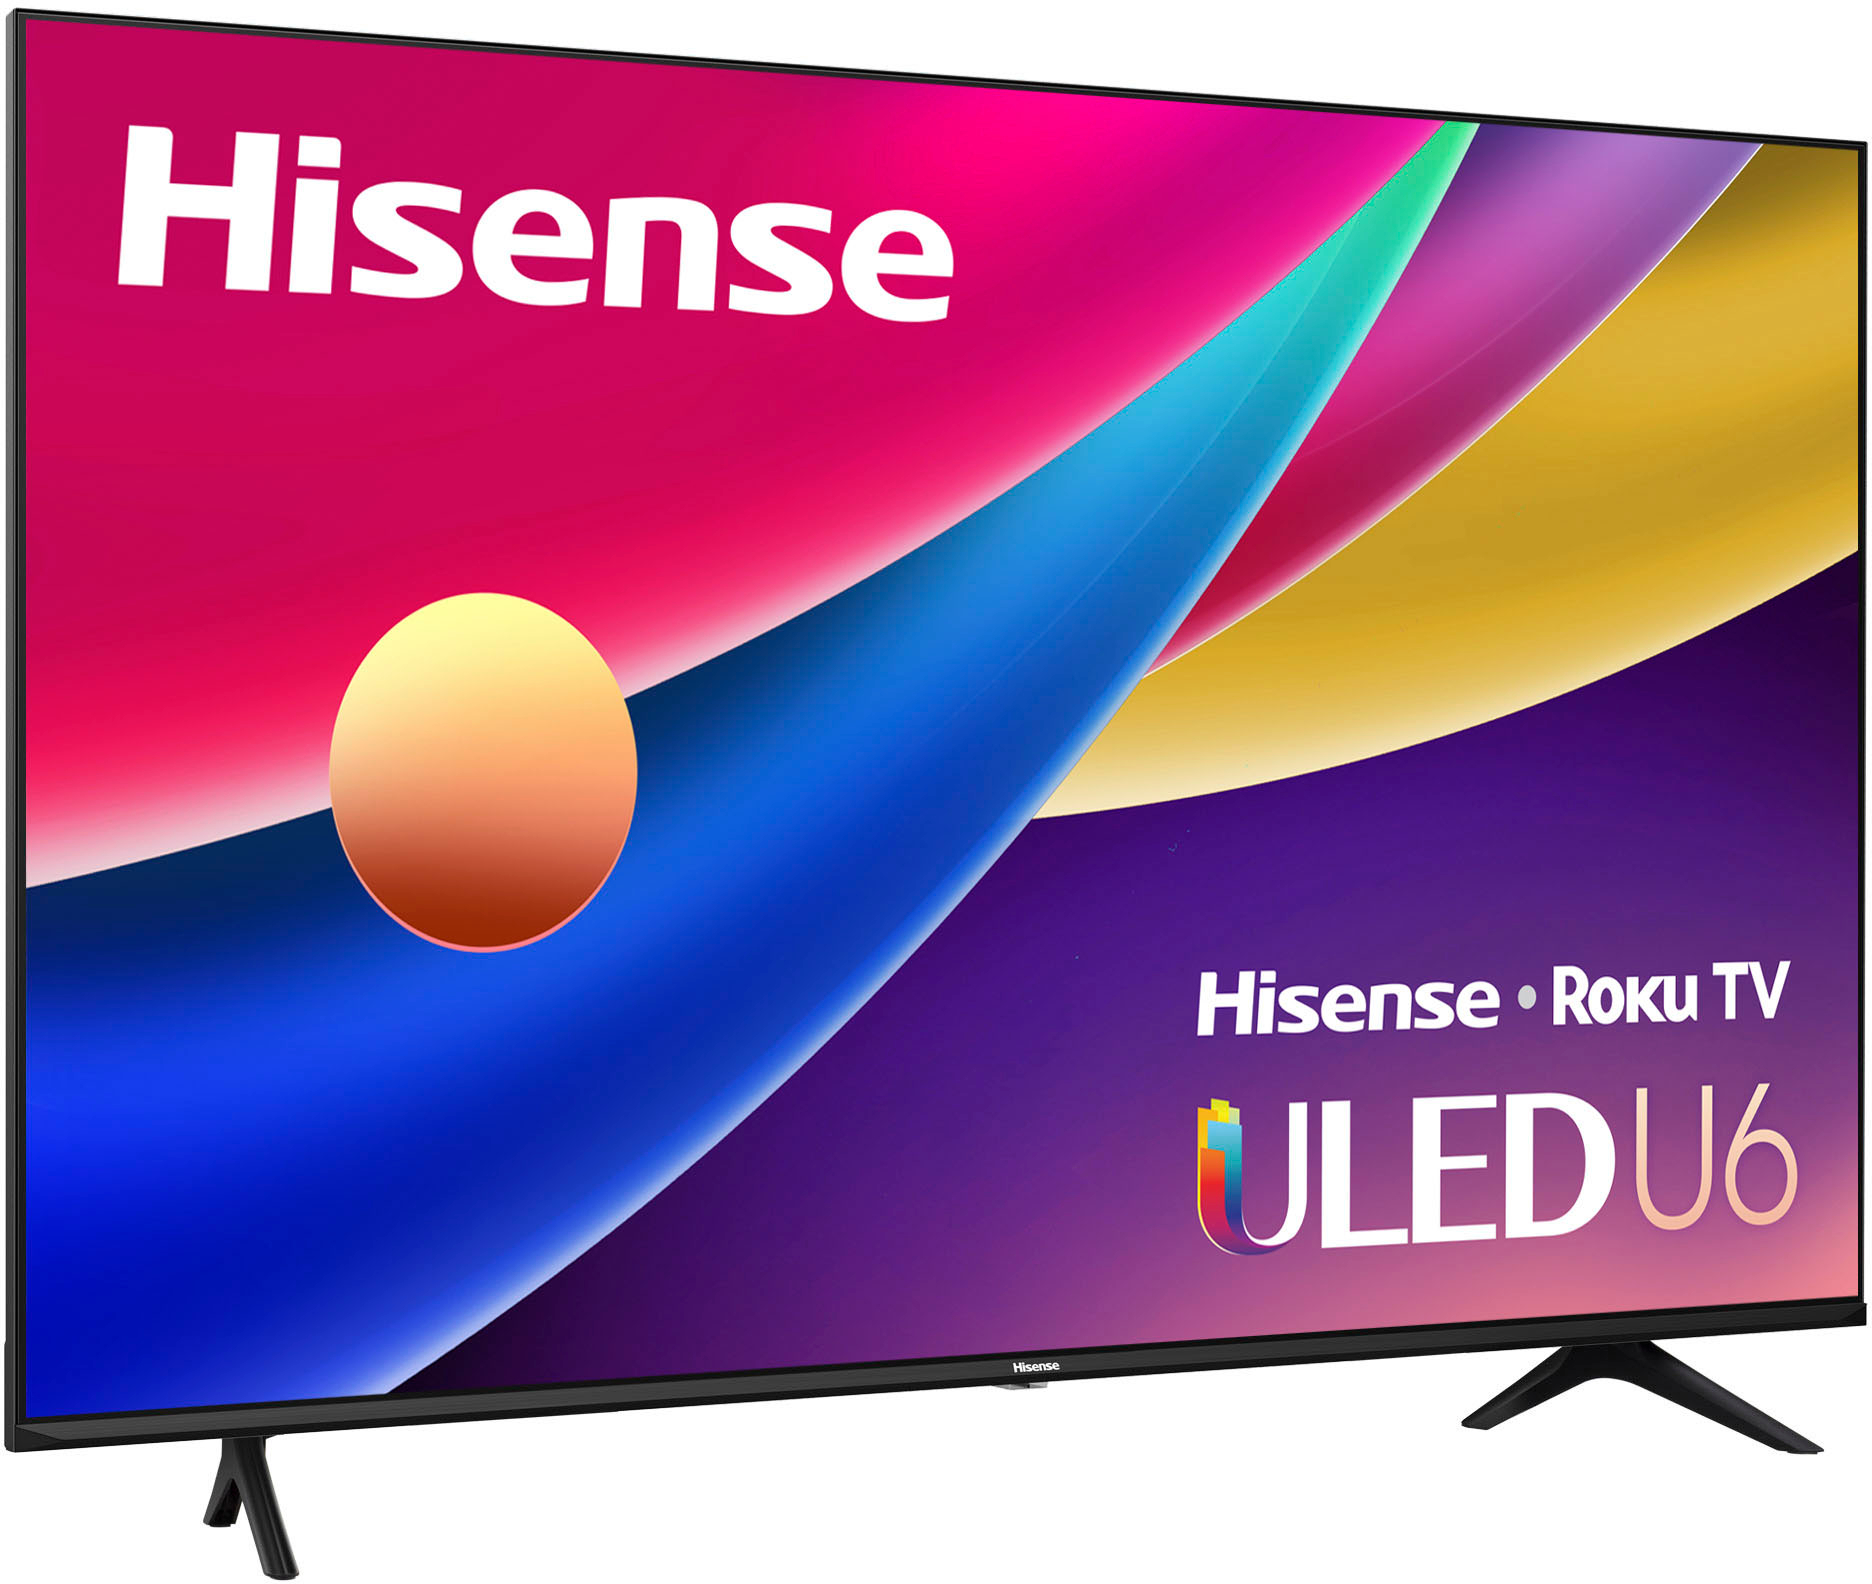  Hisense ULED 4K Premium 65U6G Quantum Dot QLED Series 65-Inch  Android 4K Smart TV with Alexa Compatibility, 600-nit HDR10+, Dolby Vision  & Atmos, Voice Remote (2021 Model) : Electronics